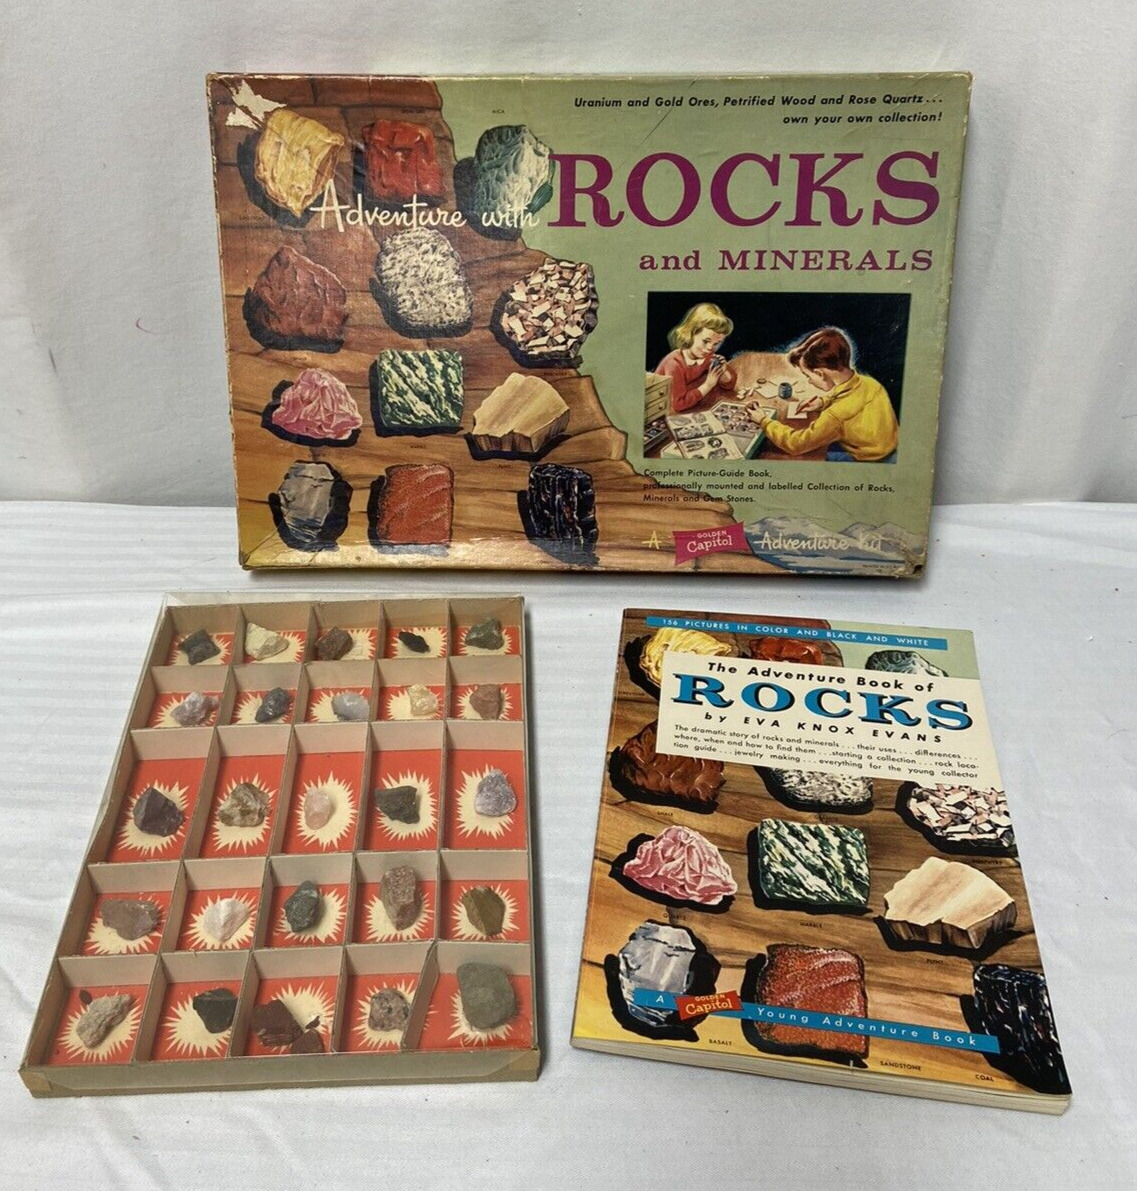 Vintage Adventure with Rocks and Minerals K1-295 1957 Simon & Schuster